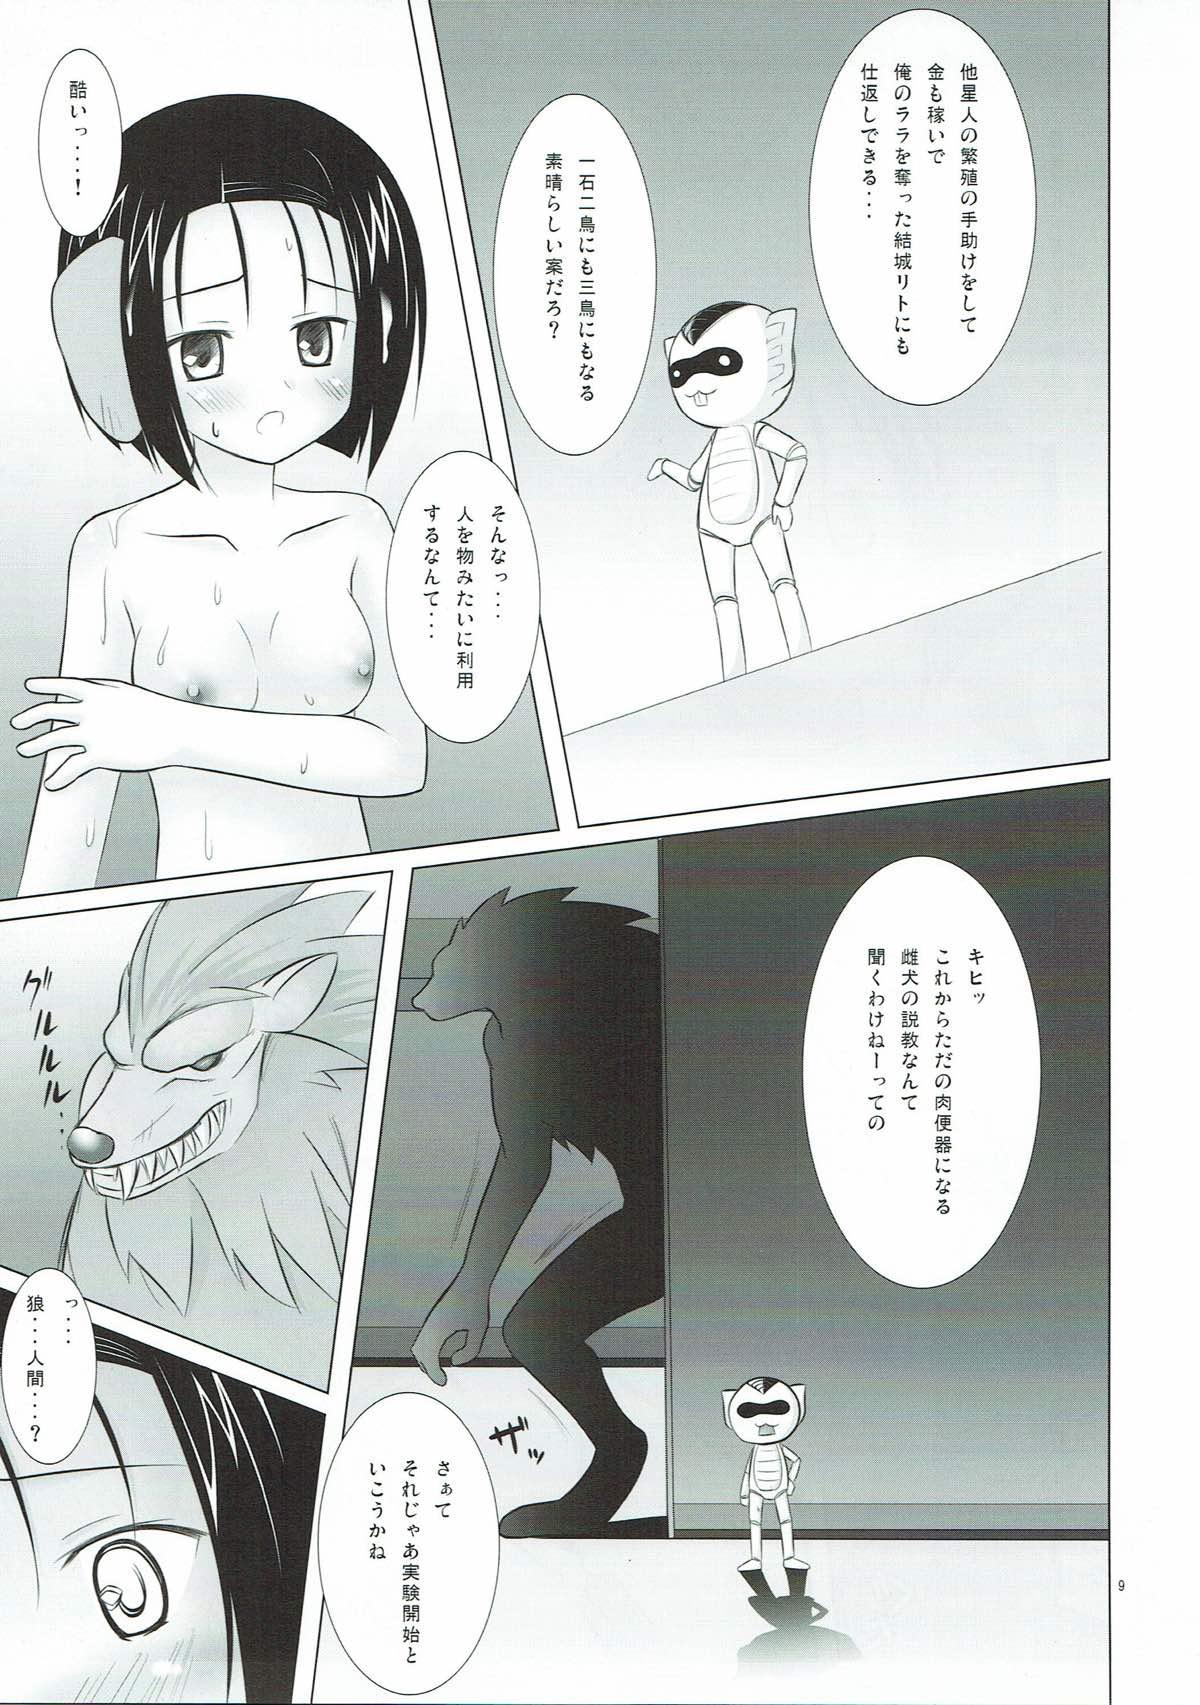 Money Talks Abduction 3 - To love ru Real - Page 8